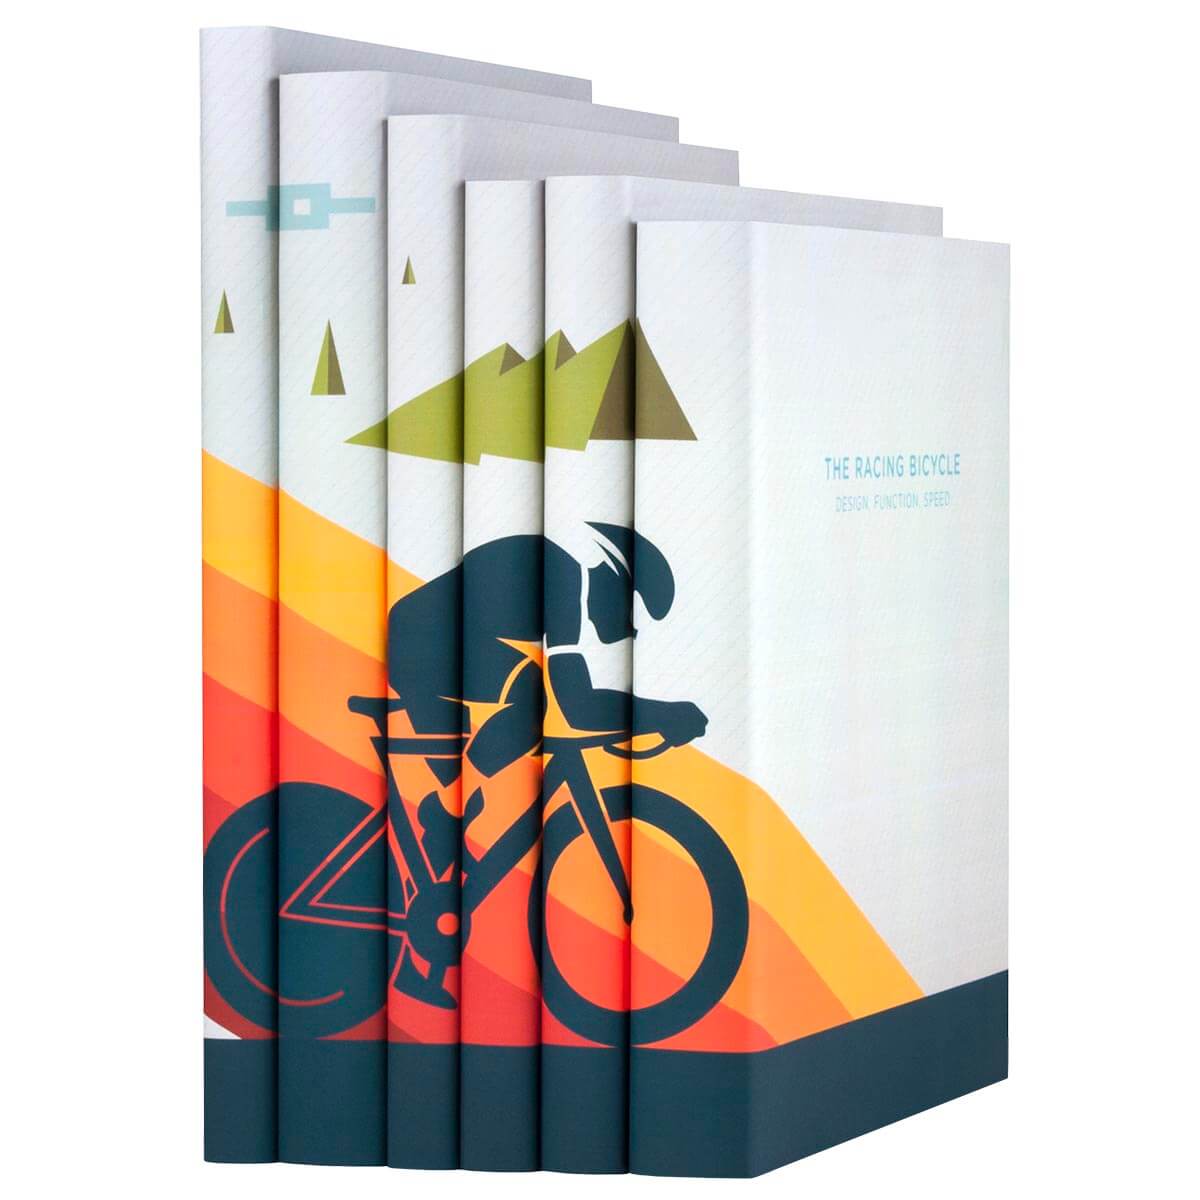 This made-to-order (MTO) set of 6 hardcover cycling books introduces the world of competitive cycling. Each book is wrapped in colorful jackets that together showcase a cyclist in action, racing across the spines. Perfect for cycling fans and hobbyists, these books will help readers explore and expand their knowledge of the sport.